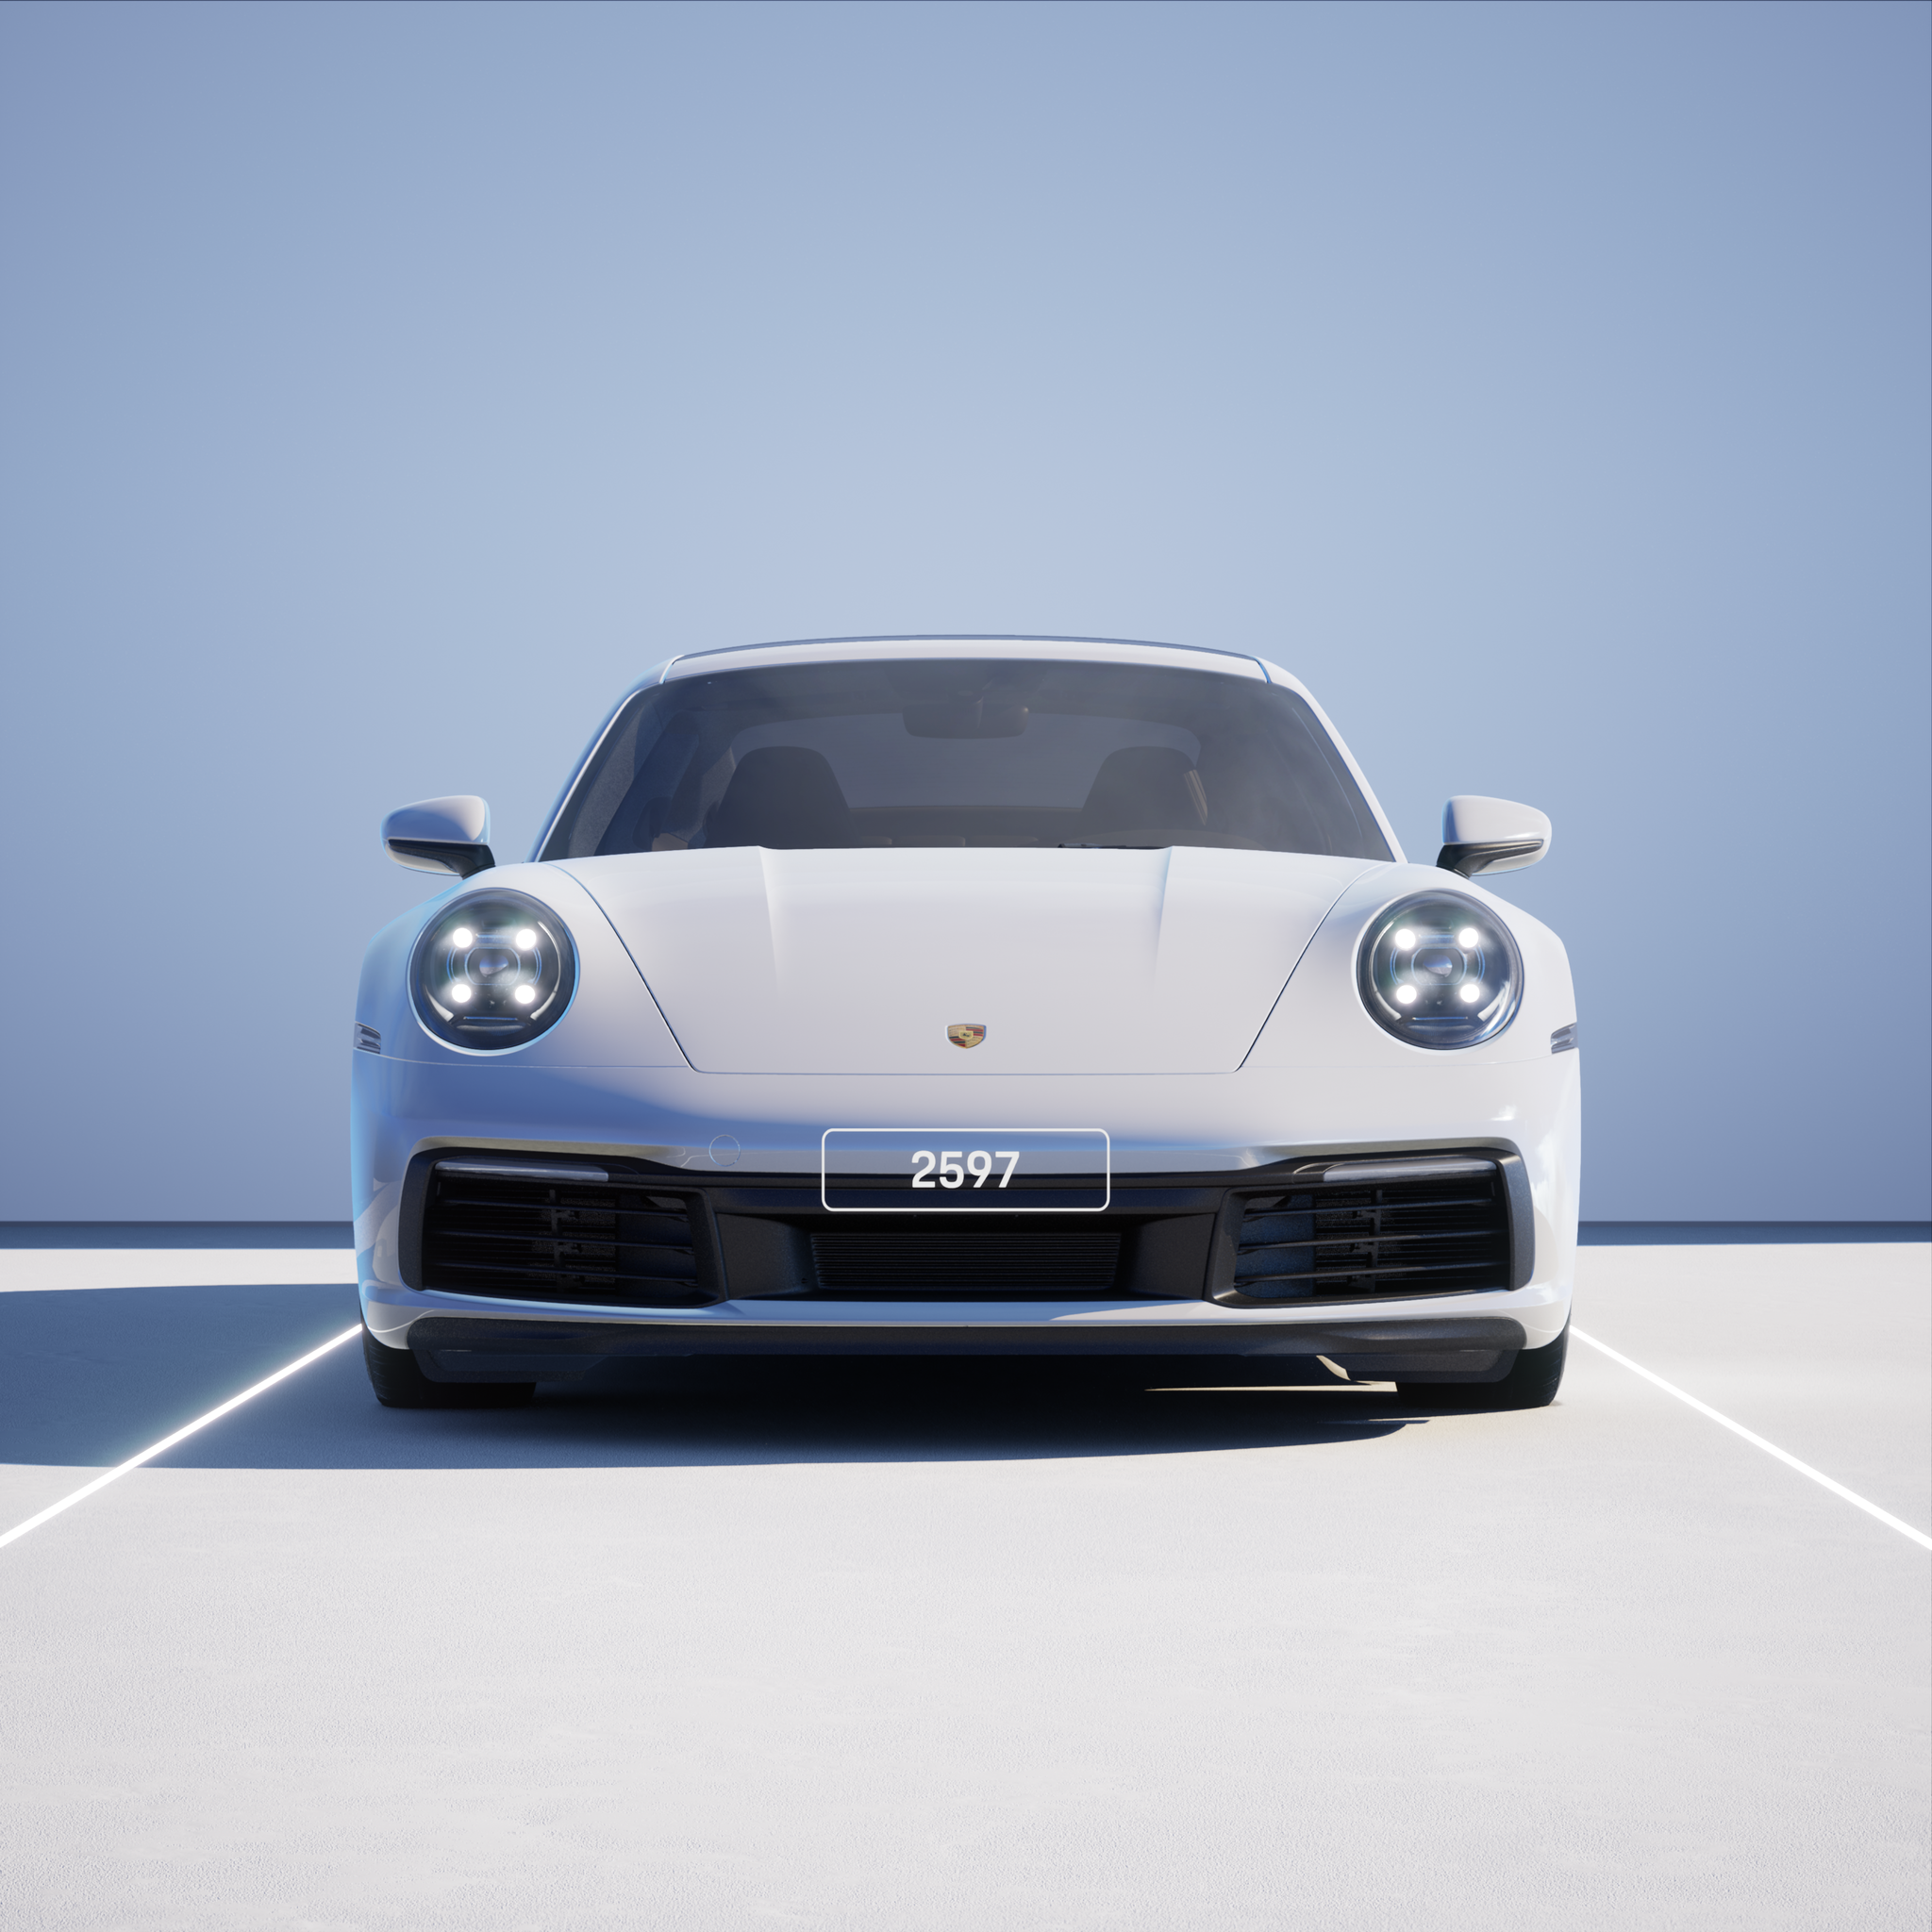 The PORSCHΞ 911 2597 image in phase